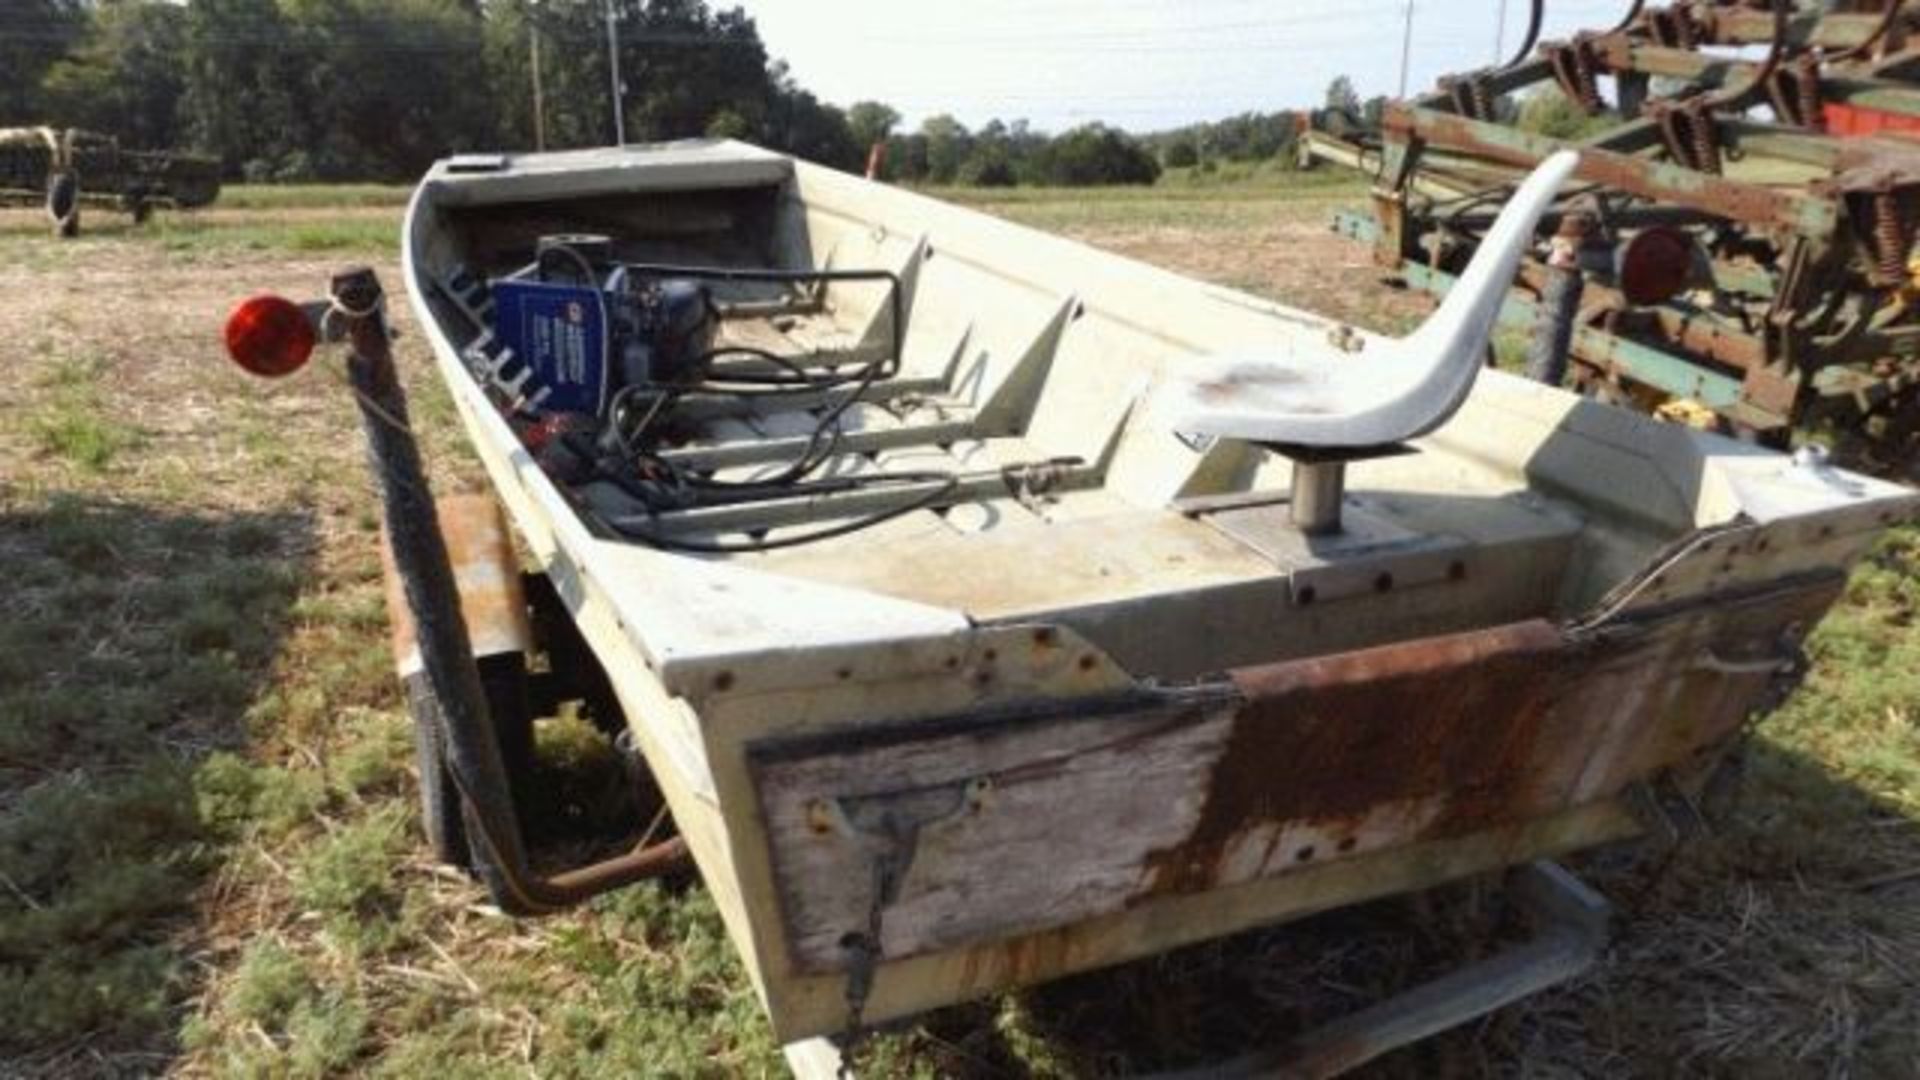 Lot 427 1958 Jon Boat and Trailer 16', No Motor, Boat Title in the Office, Trailer Does Not have a - Image 2 of 3